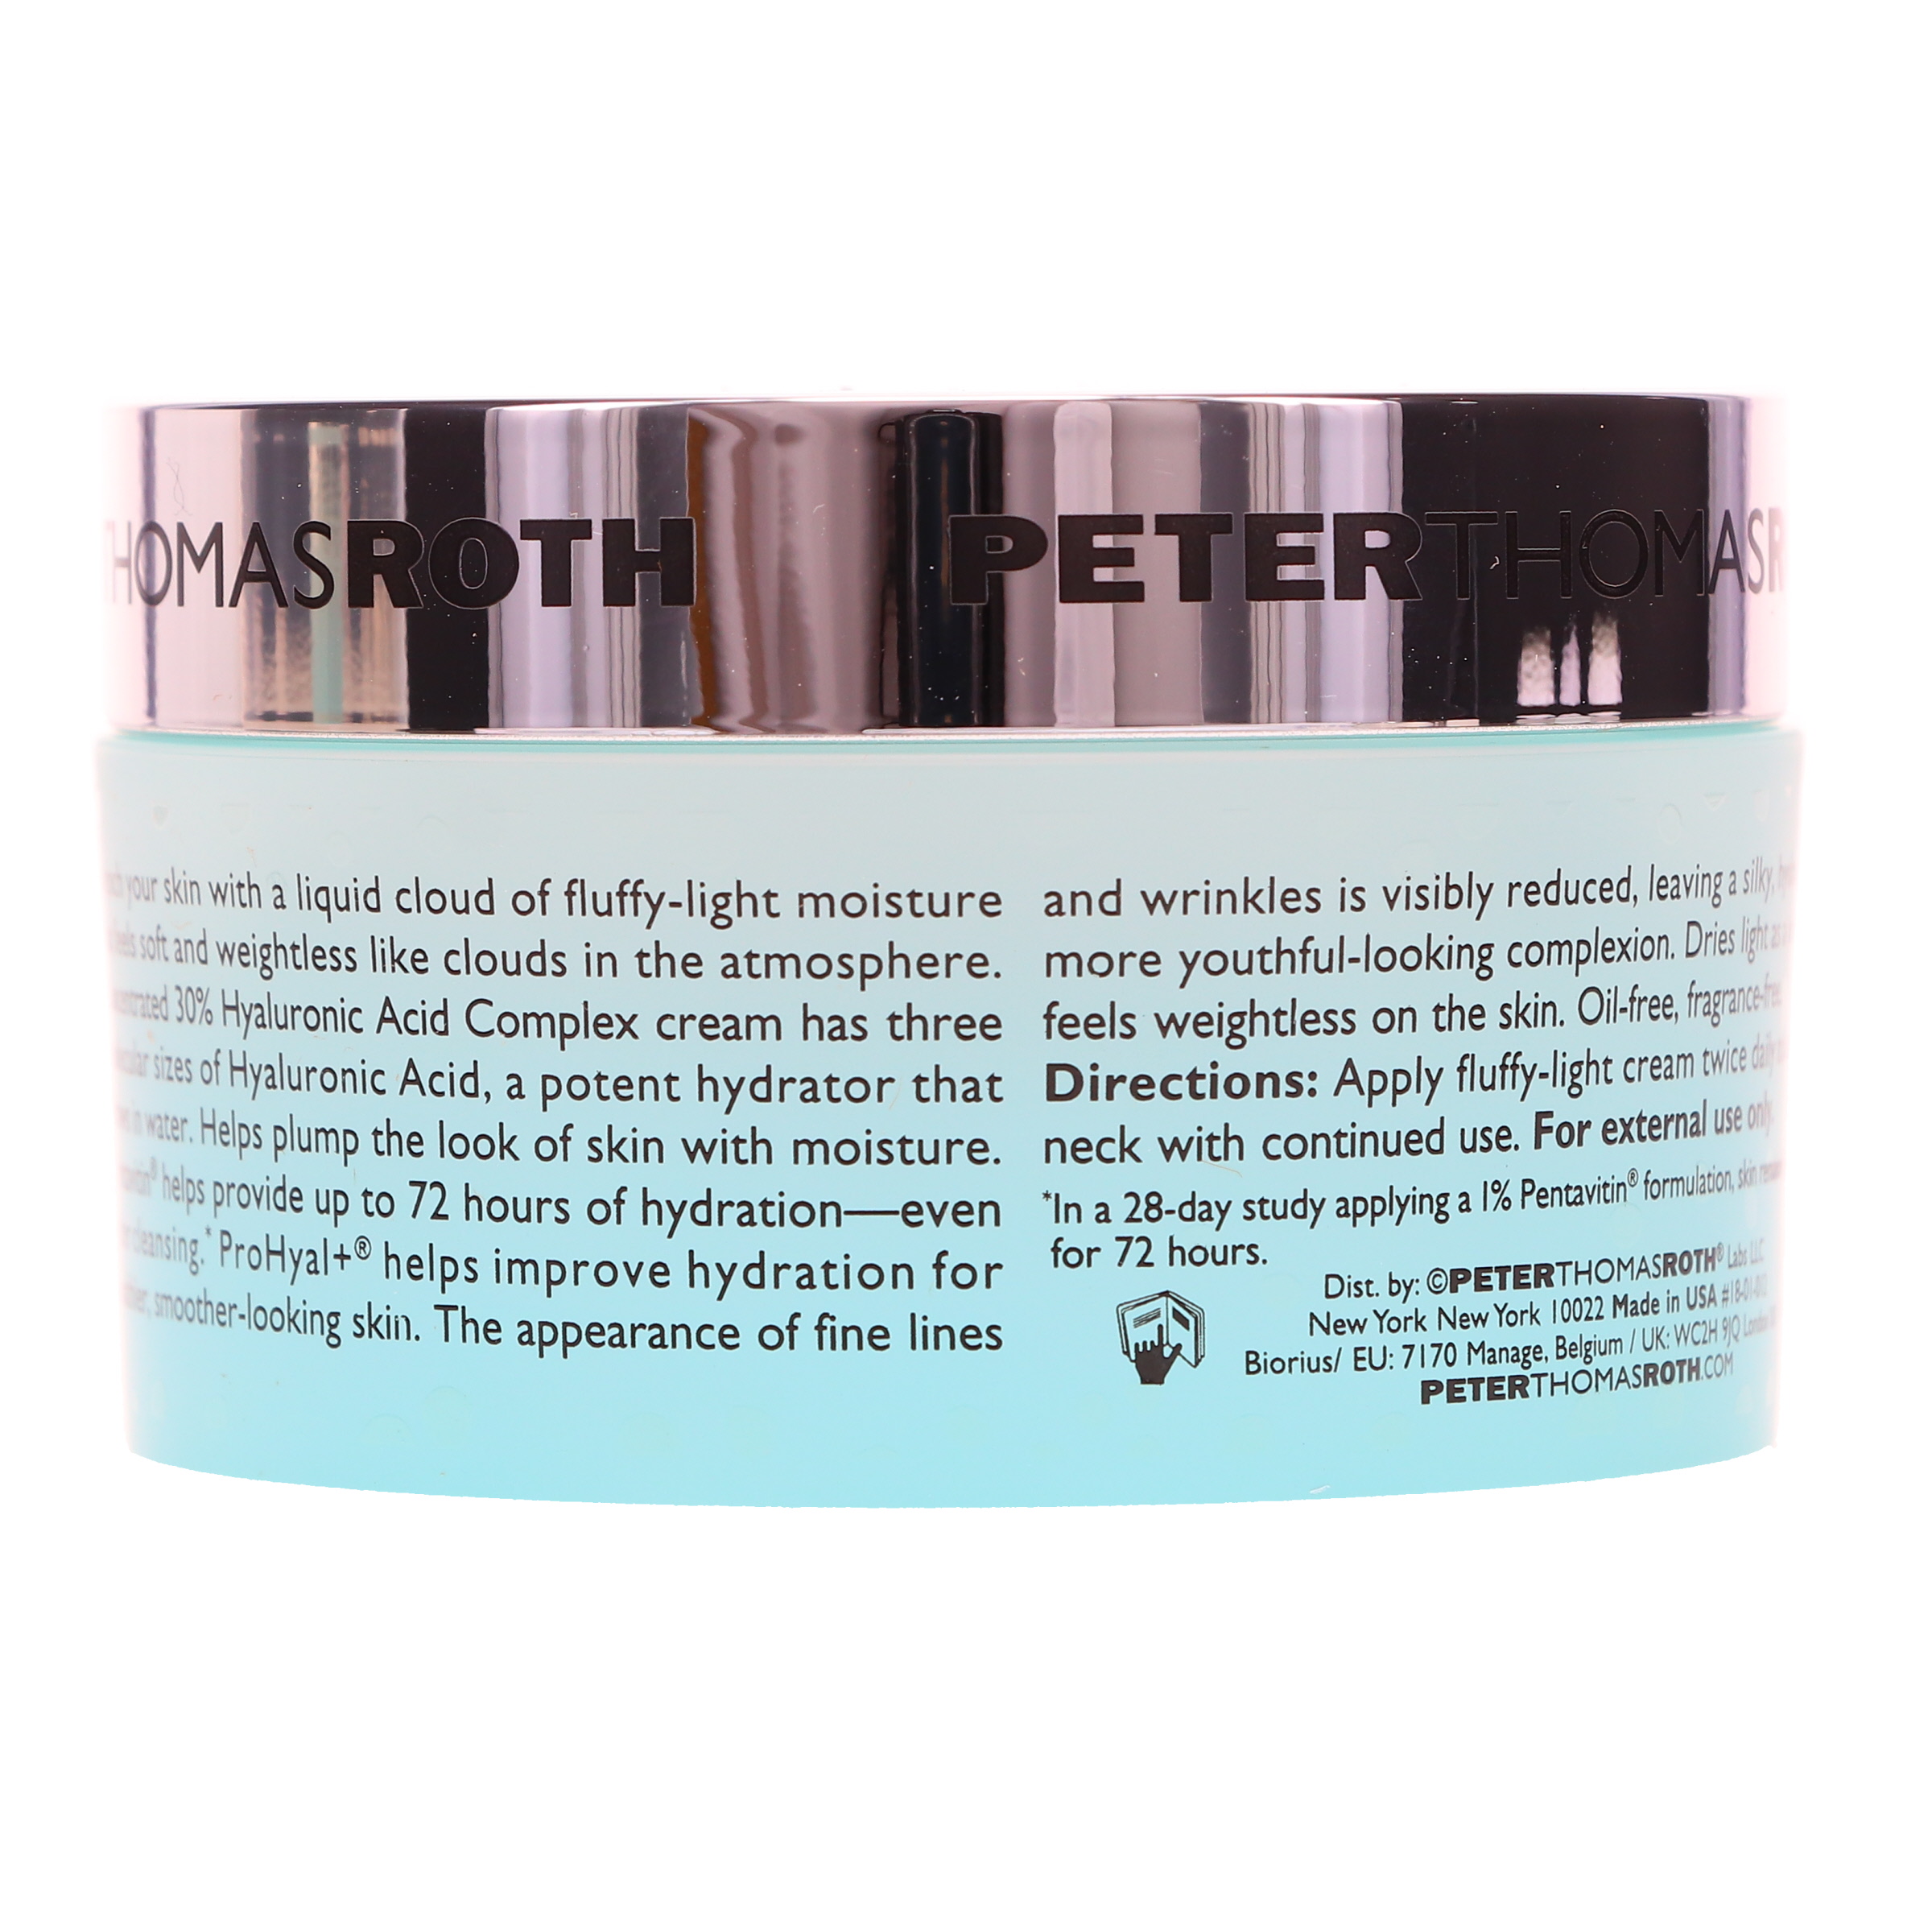 Peter Thomas Roth Water Drench Hyaluronic Cloud Cream 1.7 Hydrating Moisturizer - image 4 of 8